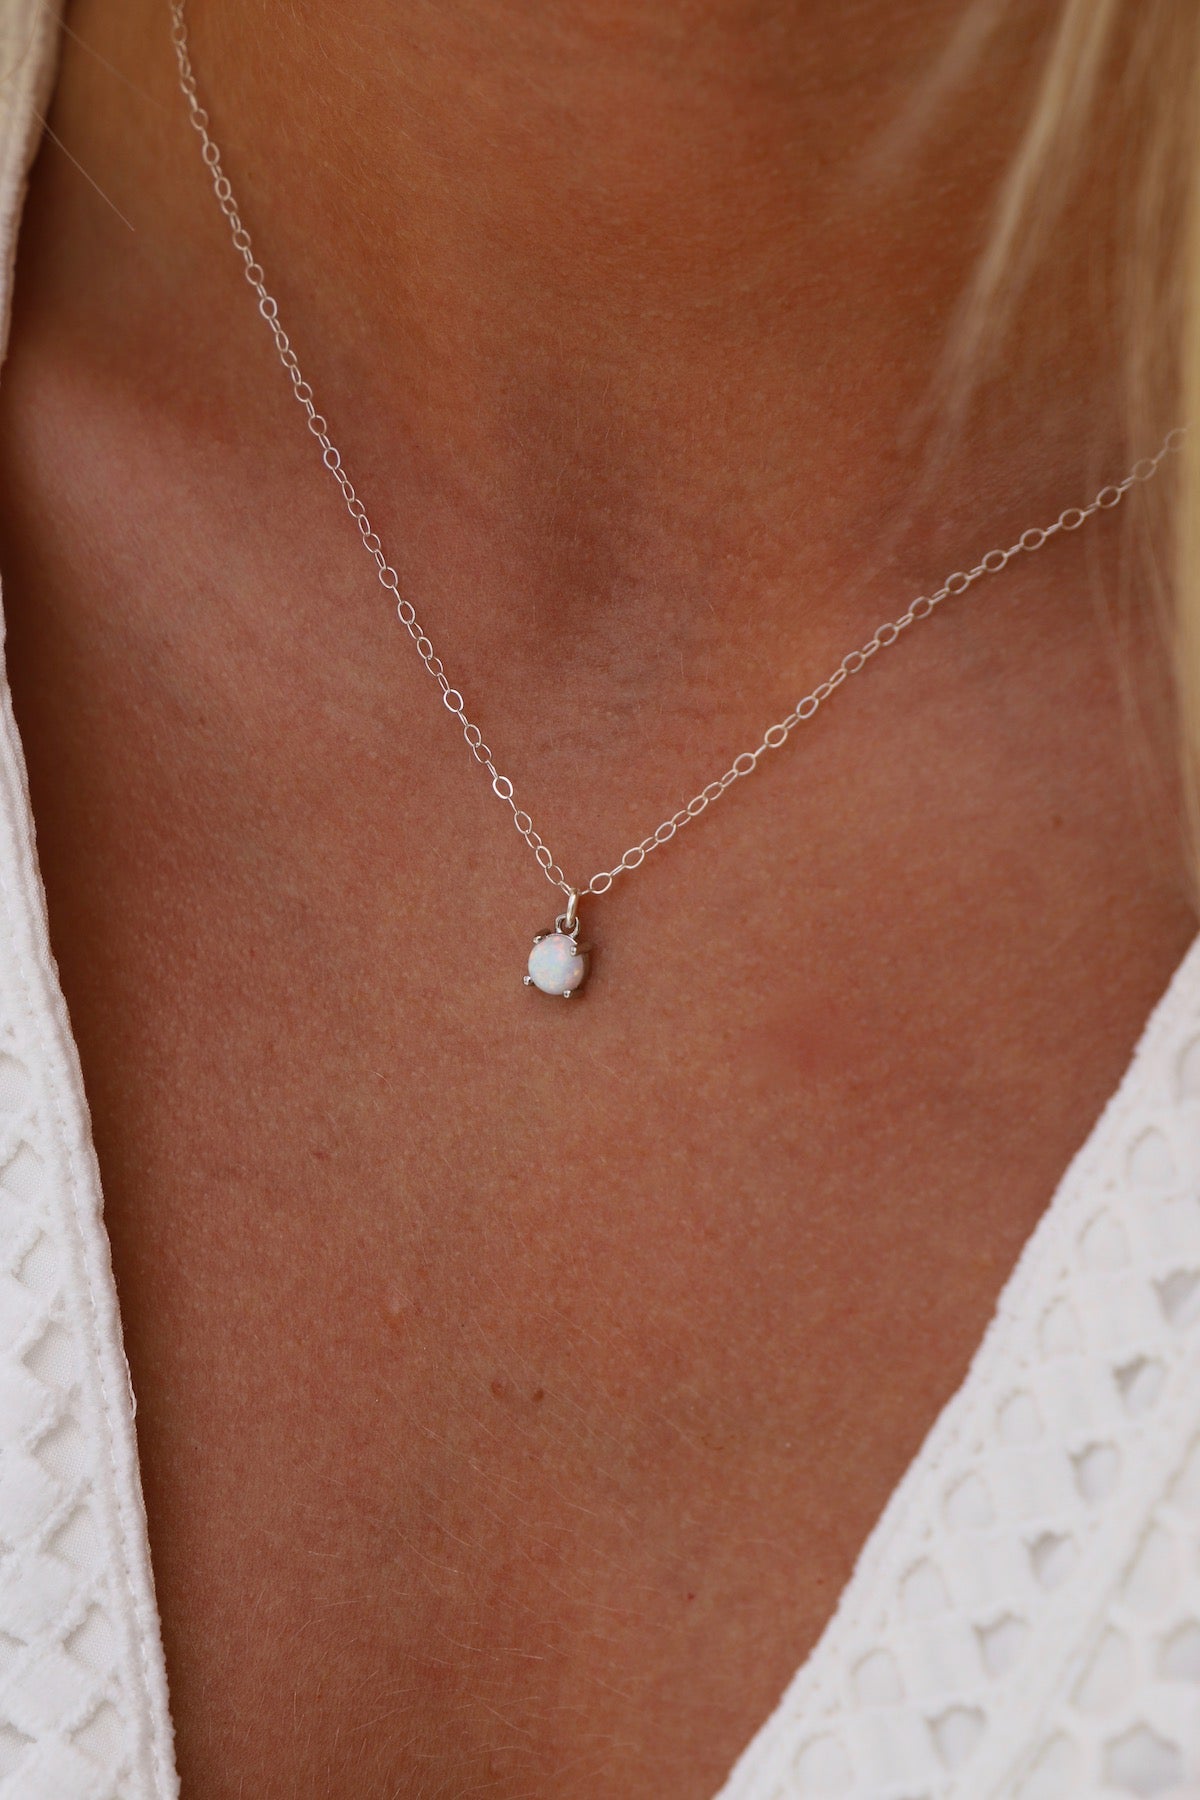 Dainty Celestial Layered Necklace SILVER | Silver prom jewelry, Silver  necklaces, Layered necklaces